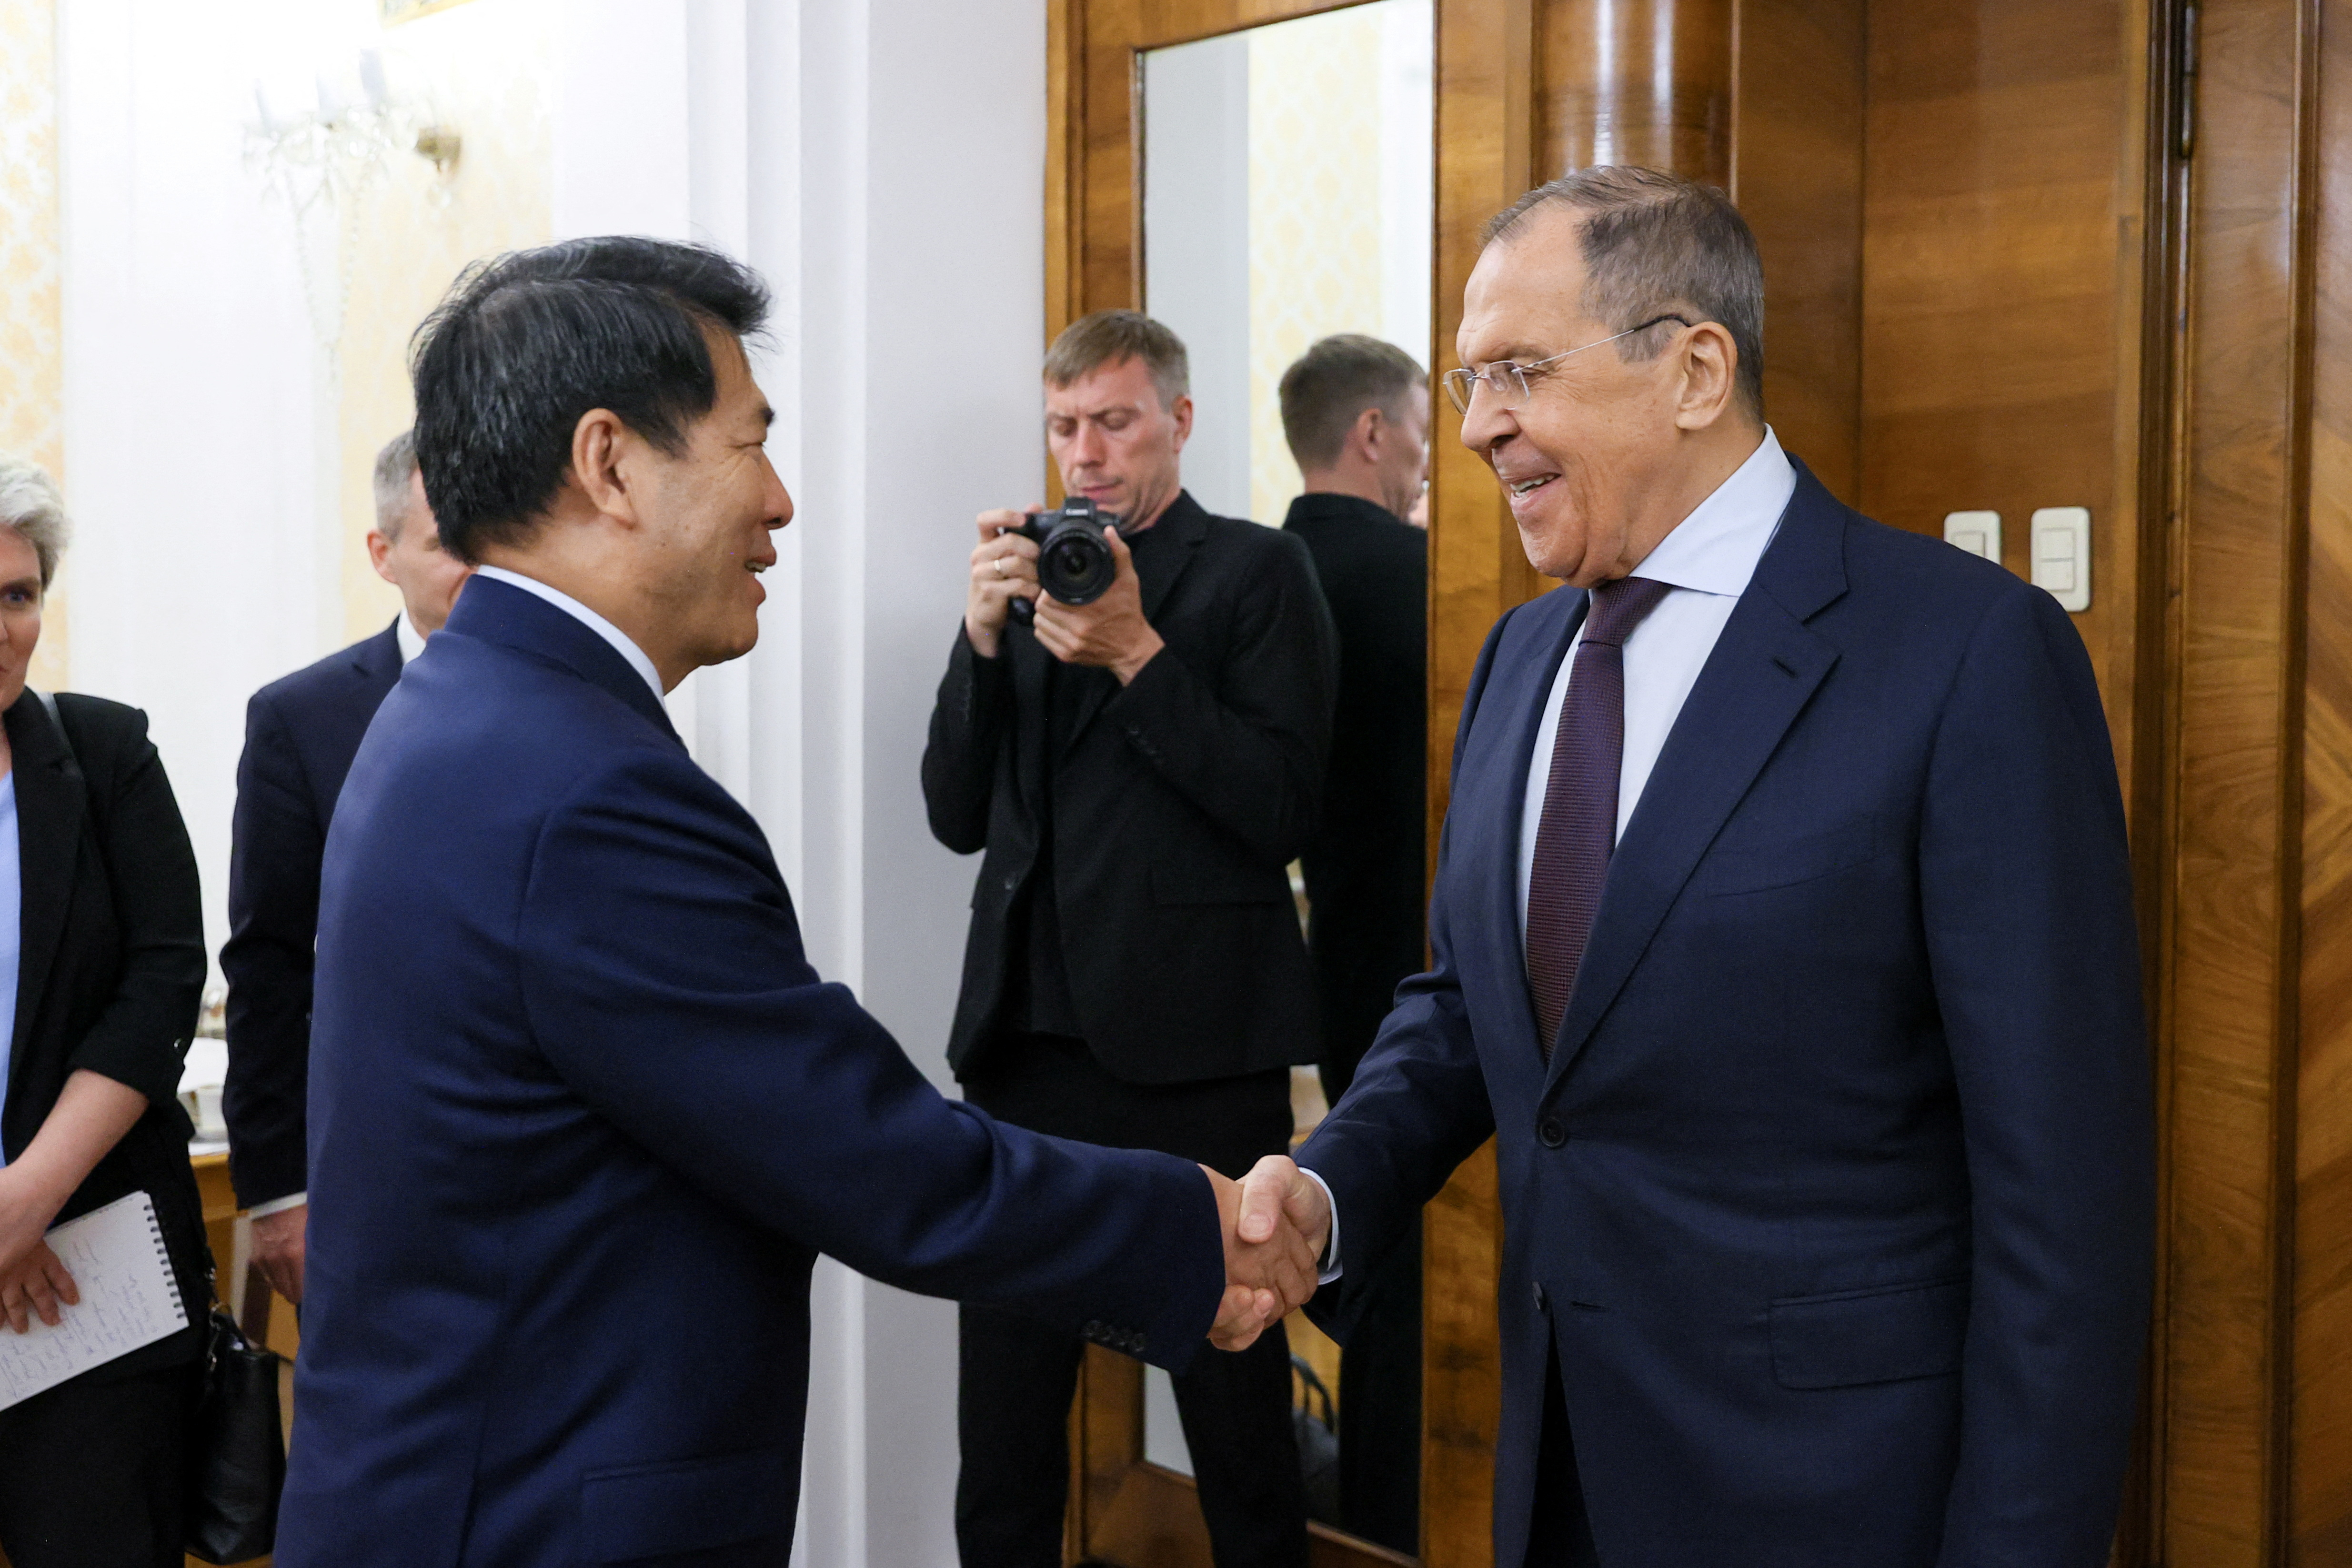 Russian Foreign Minister Sergei Lavrov and Chinese Special Envoy for Eurasian Affairs Li Hui meet in Moscow